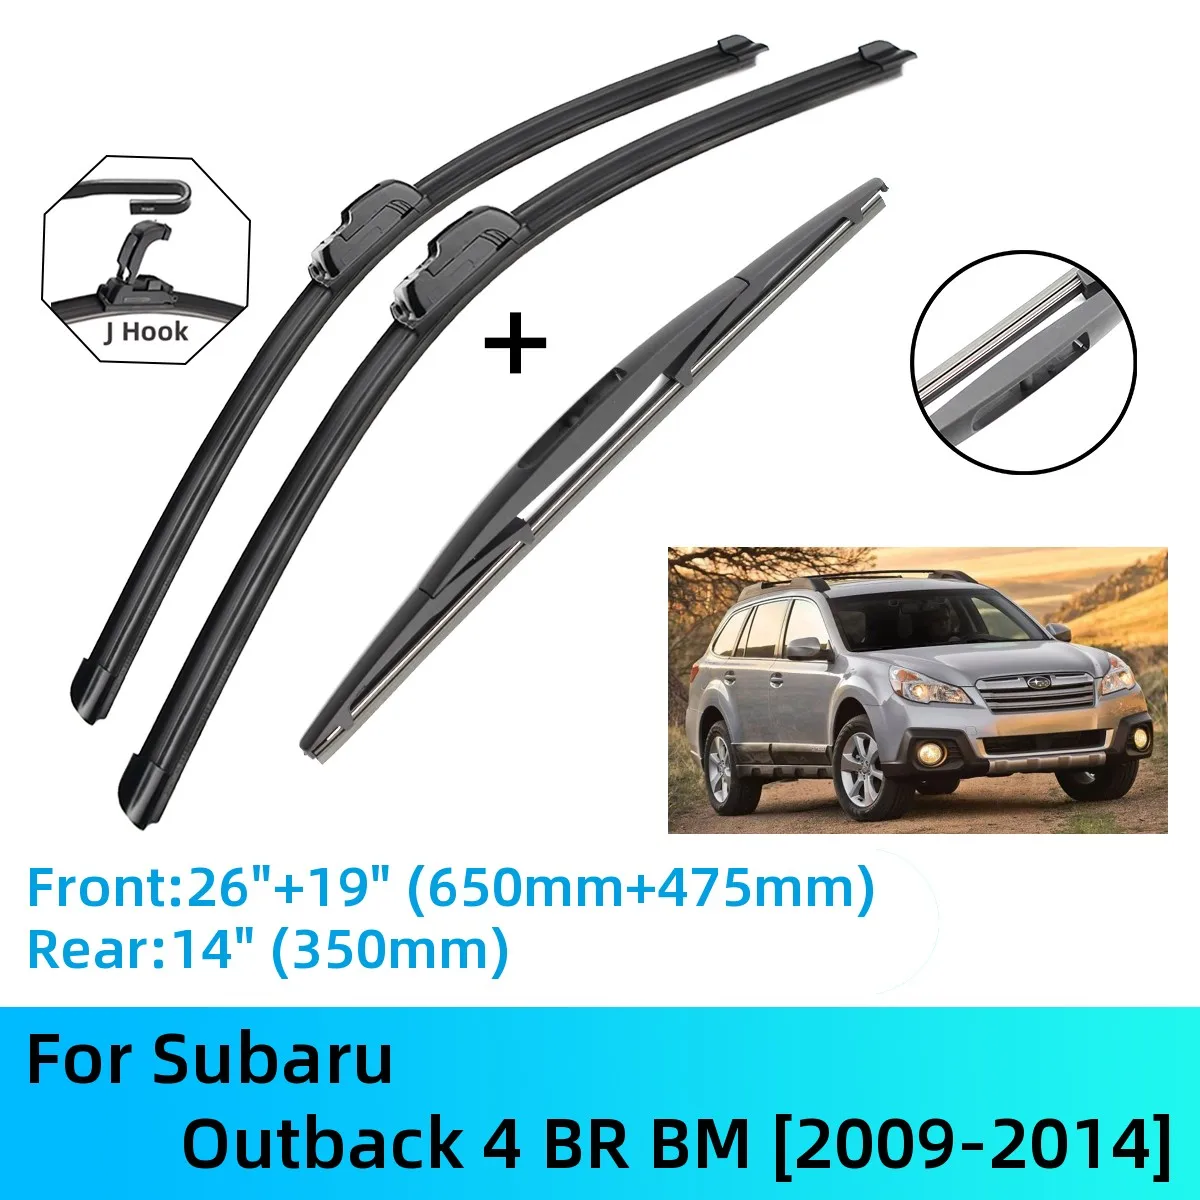 For Subaru Outback 4 BR BM Front Rear Wiper Blades Brushes Cutter Accessories J U Hook 2009-2014 2009 2010 2011 2012 2013 2014